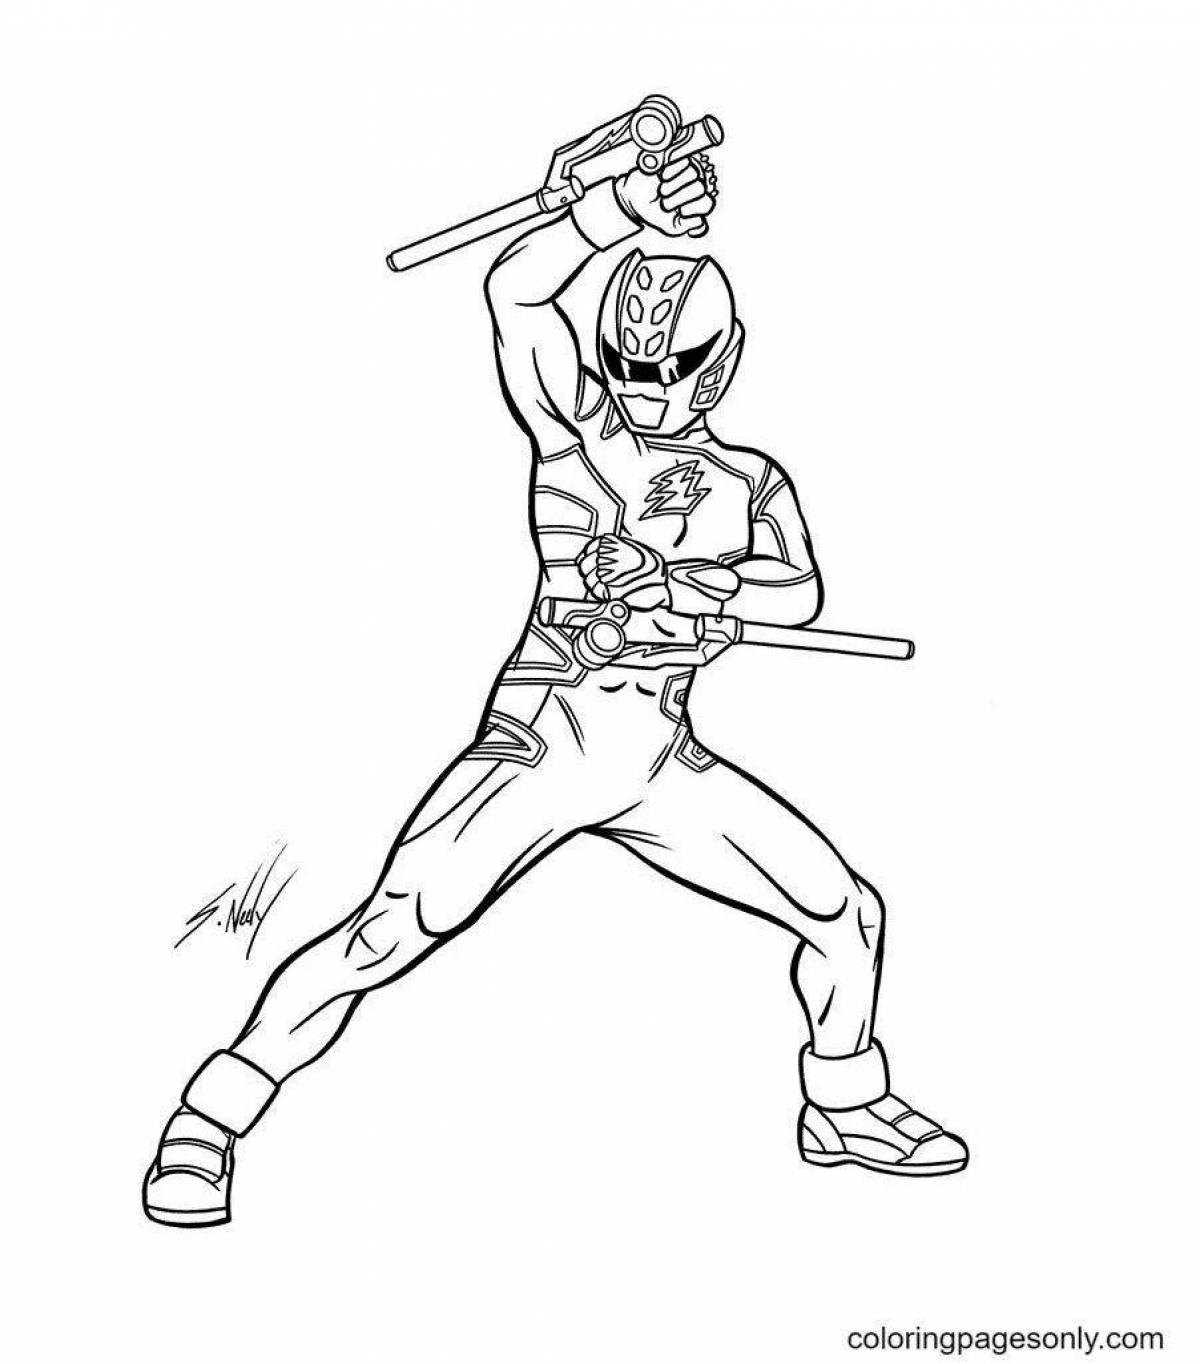 Power rangers coloring pages